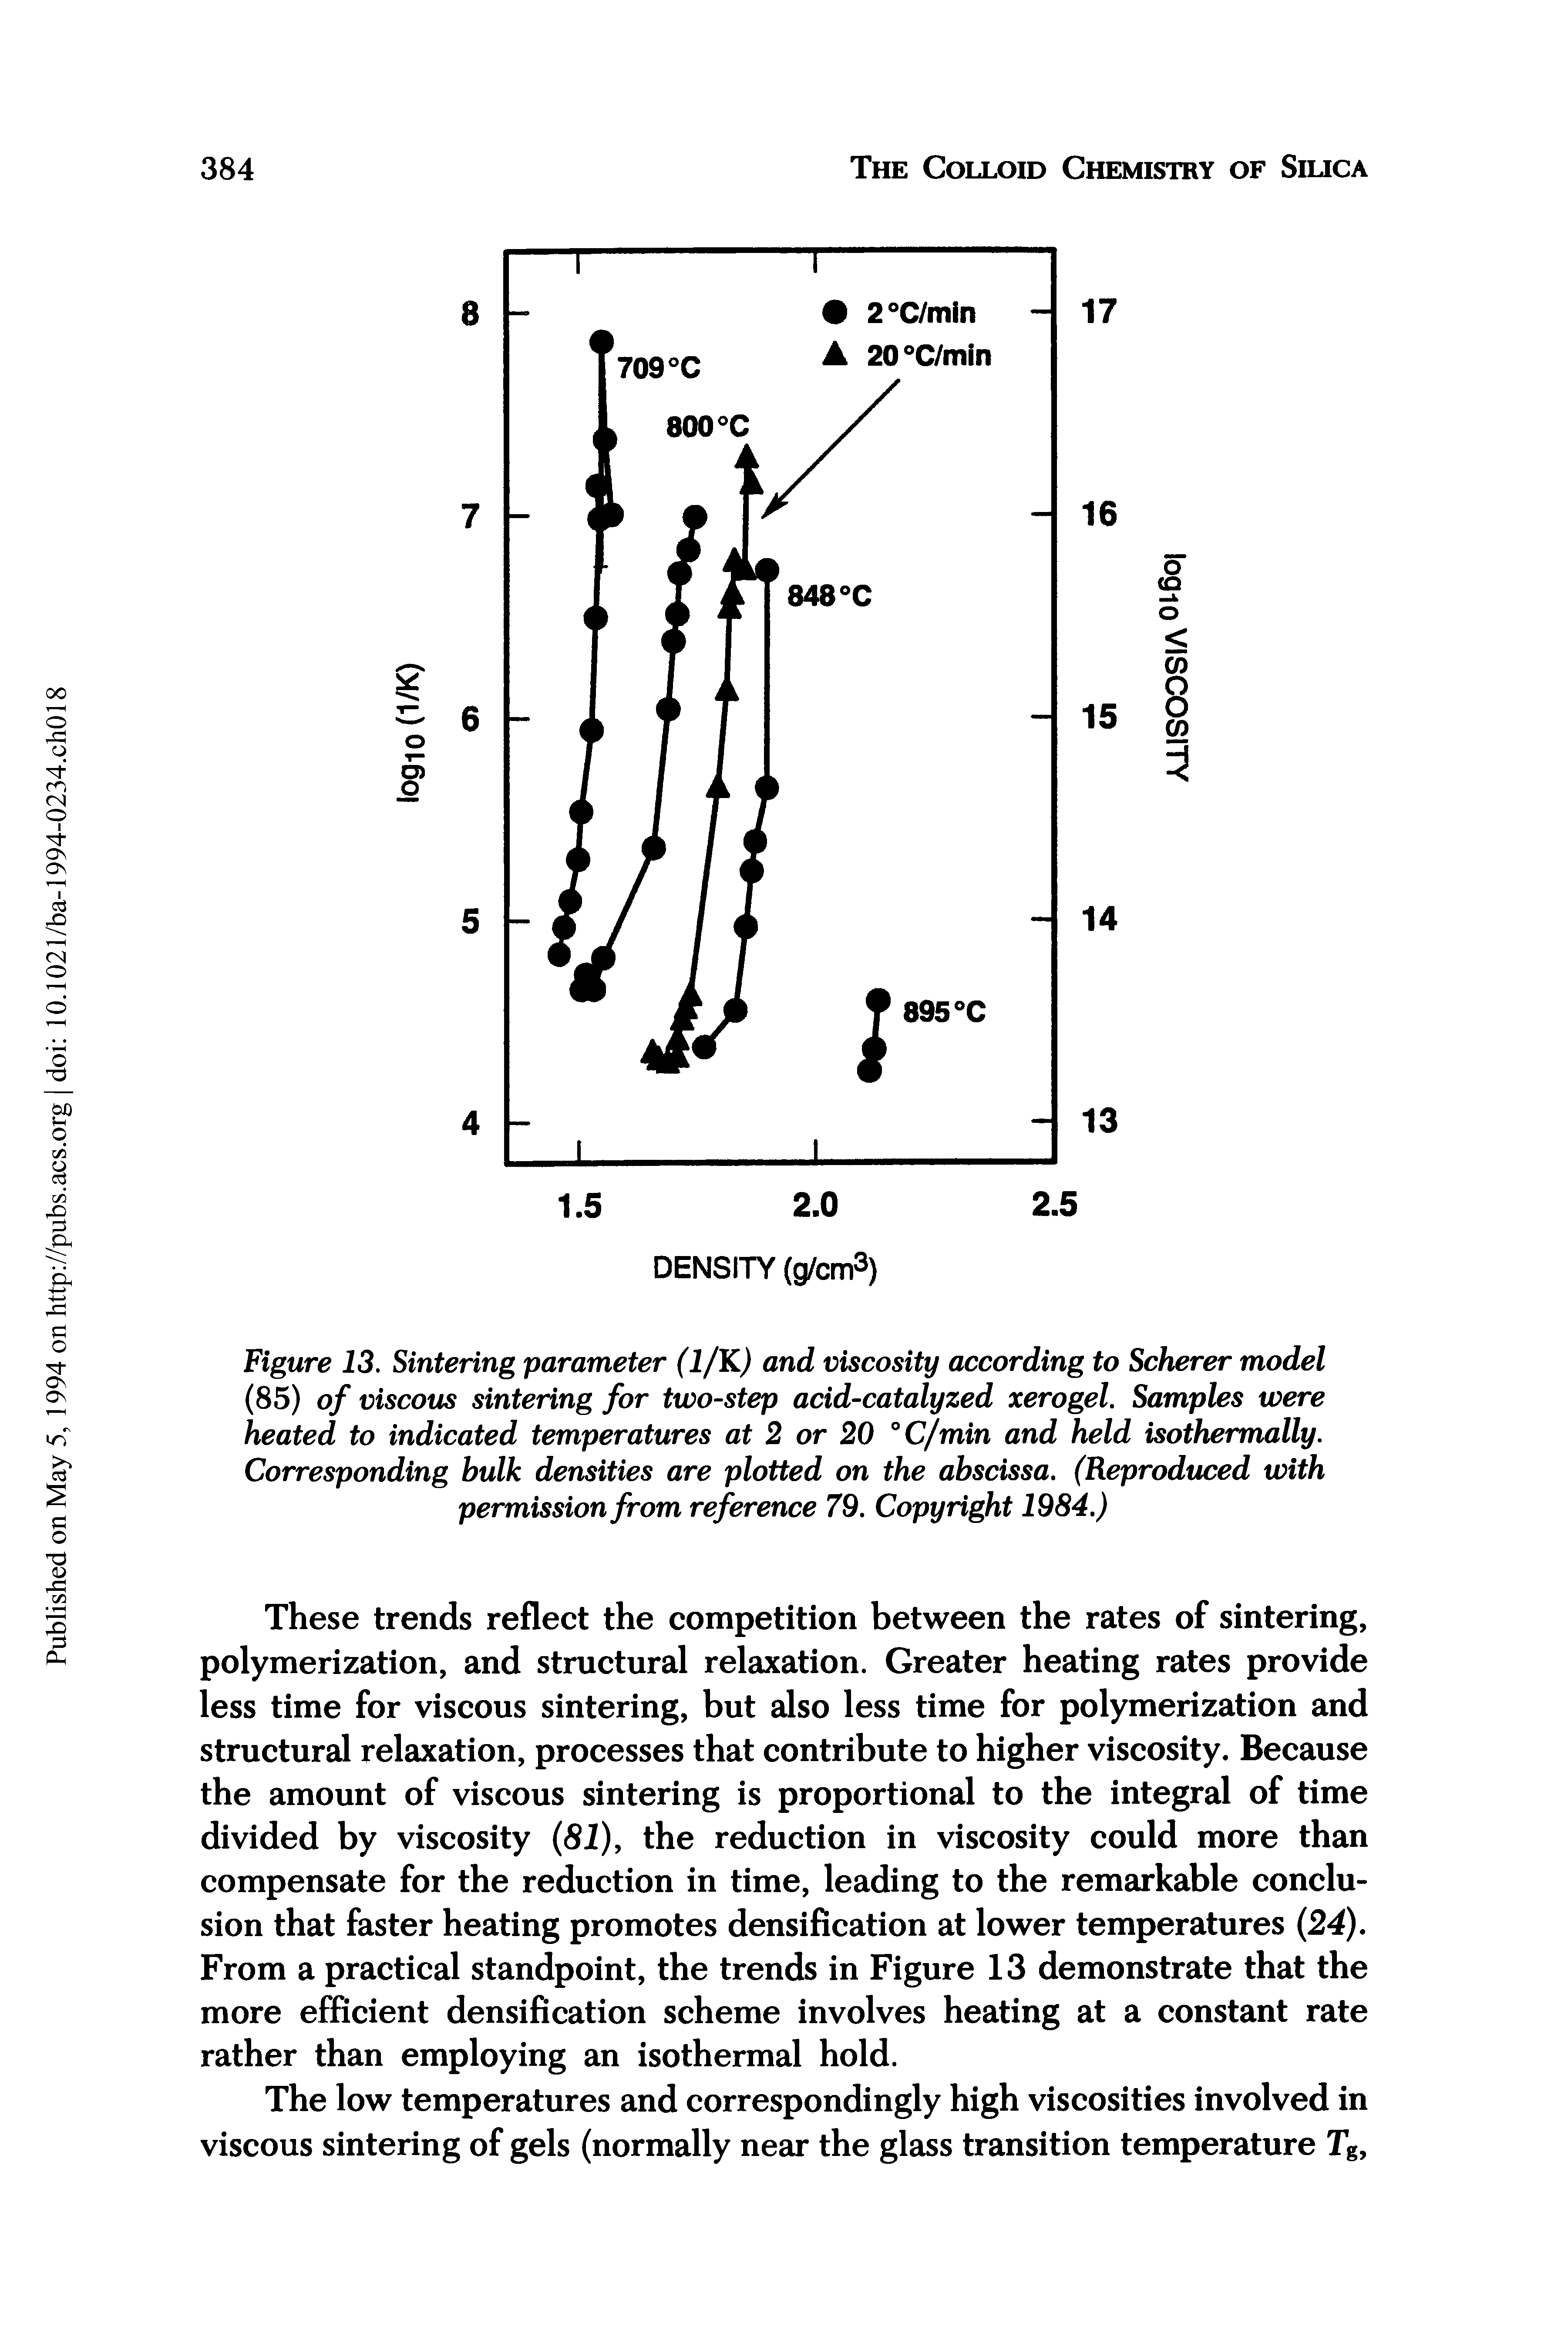 Figure 13. Sintering parameter (1/K) and viscosity according to Scherer model (85) of viscous sintering for two-step acid-catalyzed xerogel. Samples were heated to indicated temperatures at 2 or 20 °C/min and held isothermally. Corresponding bulk densities are plotted on the abscissa. (Reproduced with permission from reference 79. Copyright 1984.)...